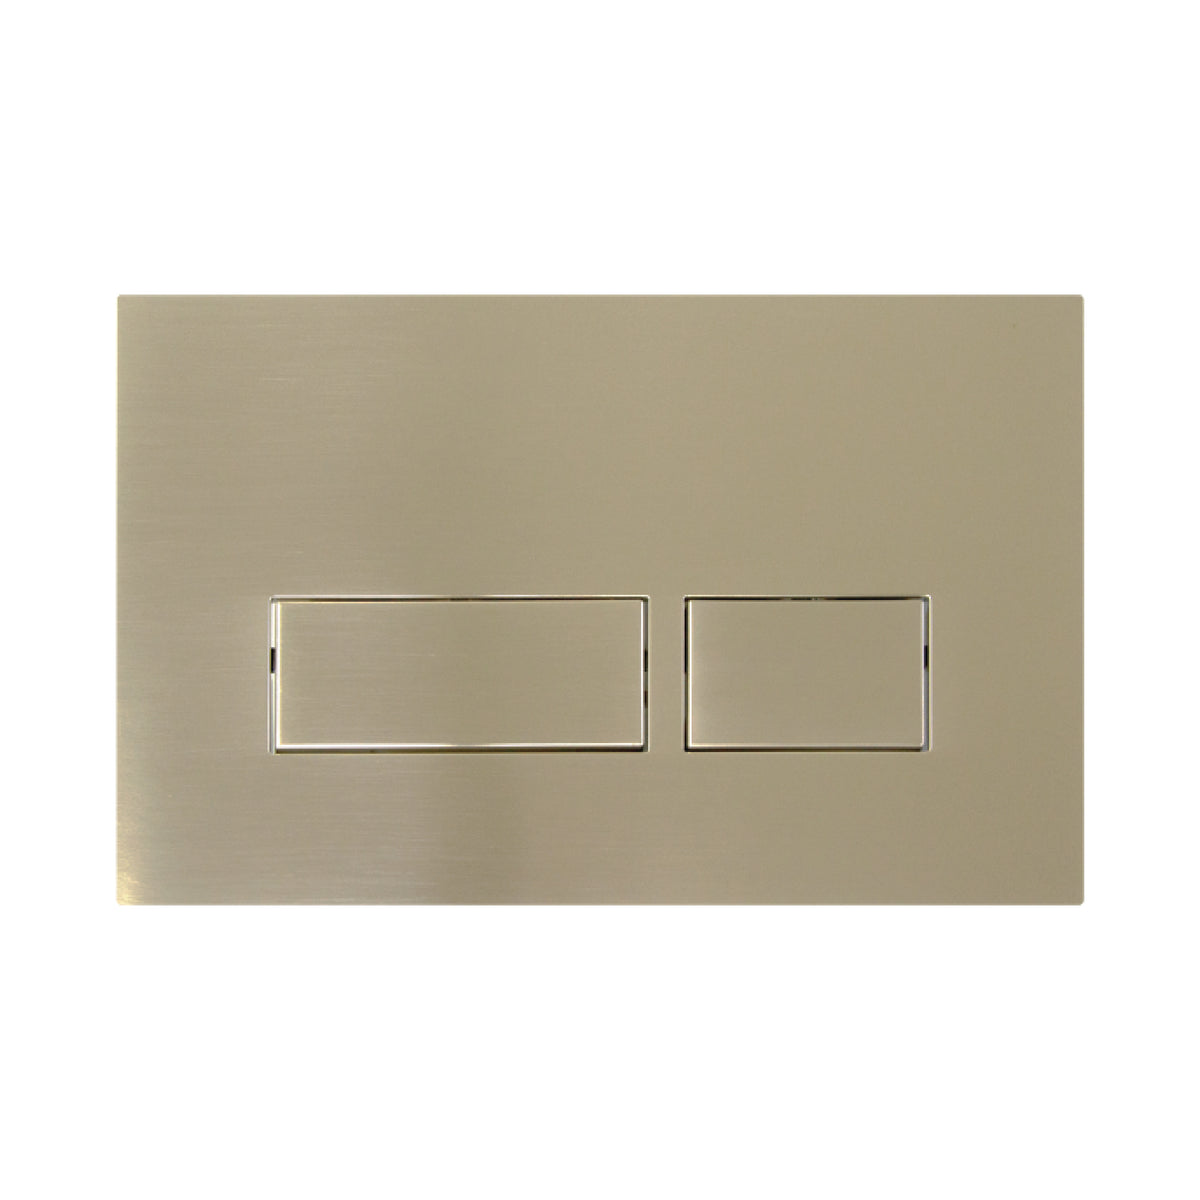 Niche Wall Hung Full Kit with Square Brushed Nickel Push Plate